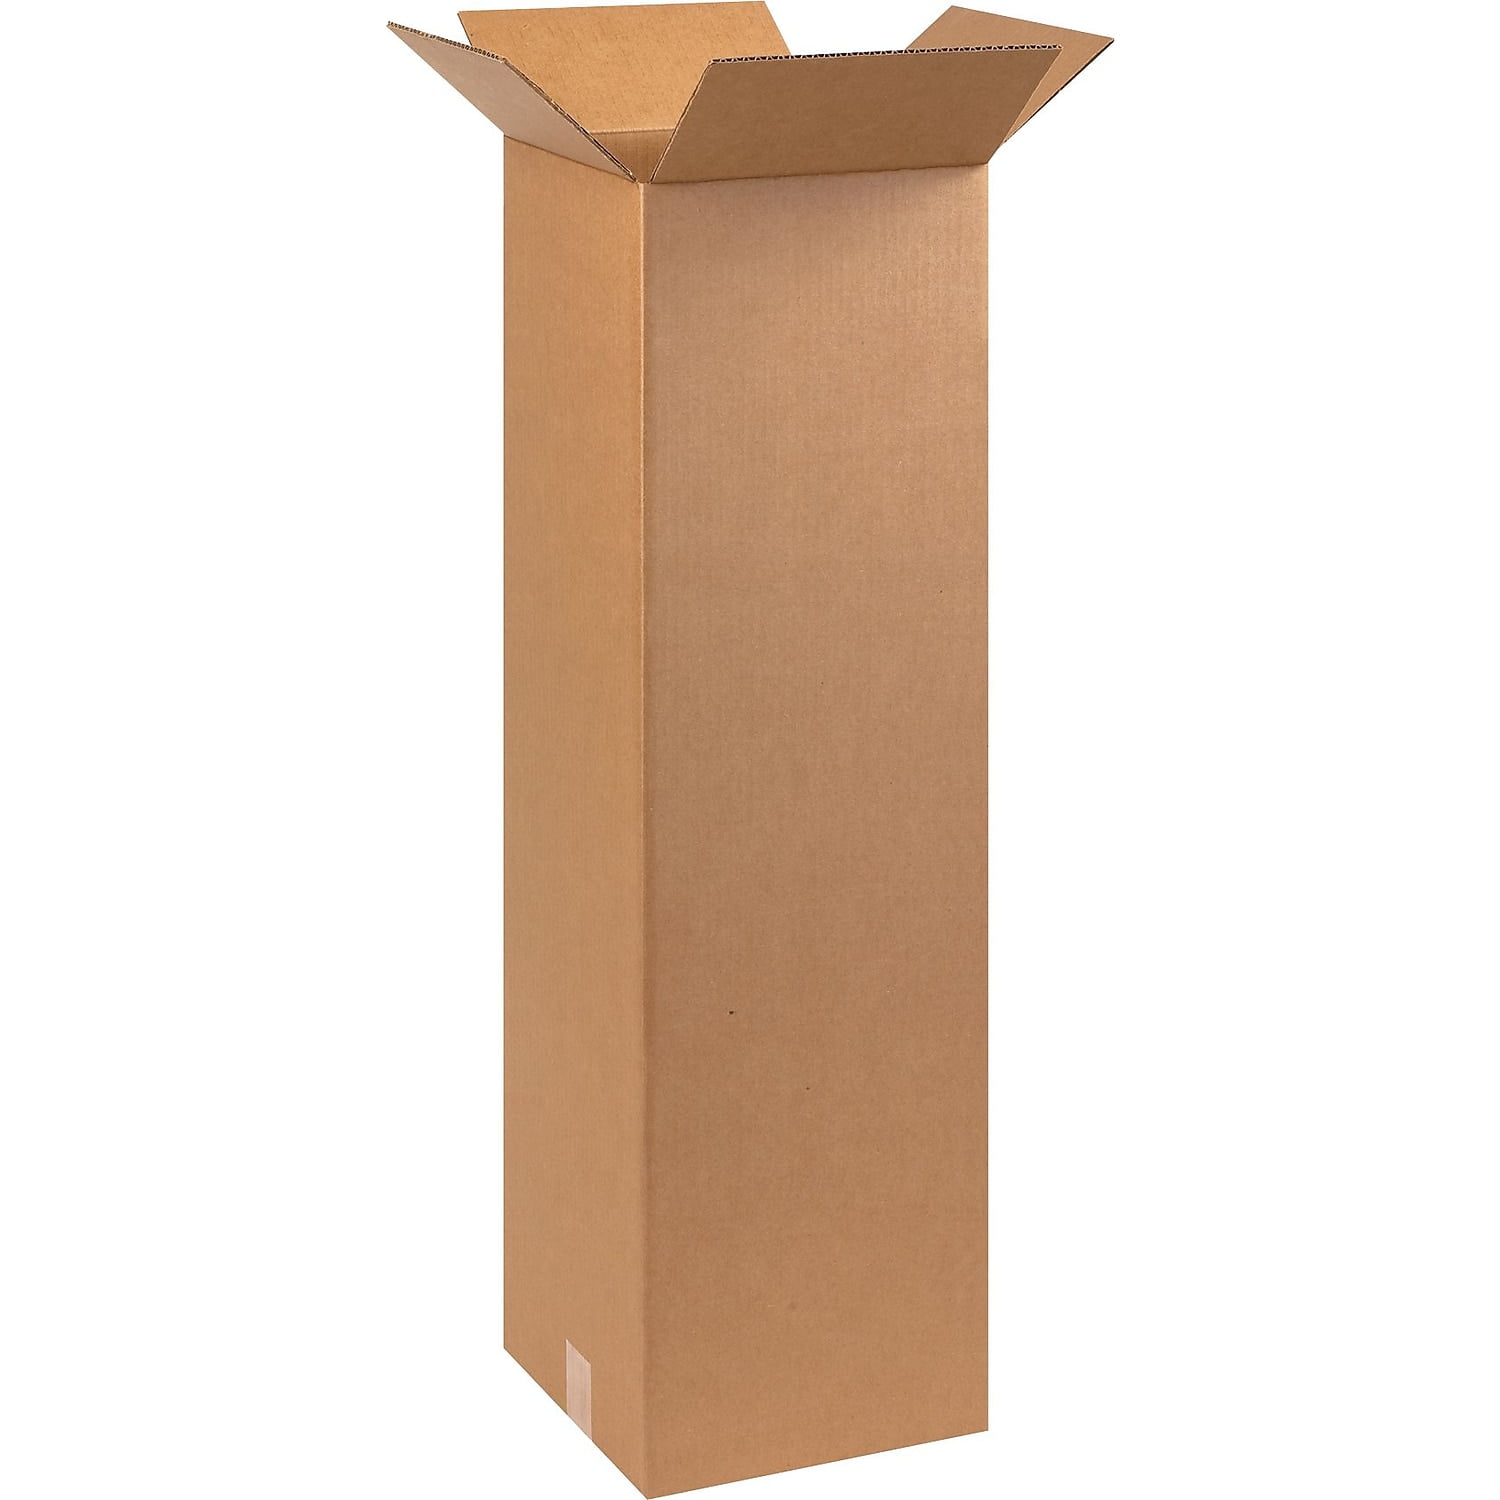 25 8x8x30 Tall Corrugated Shipping Packing Boxes 